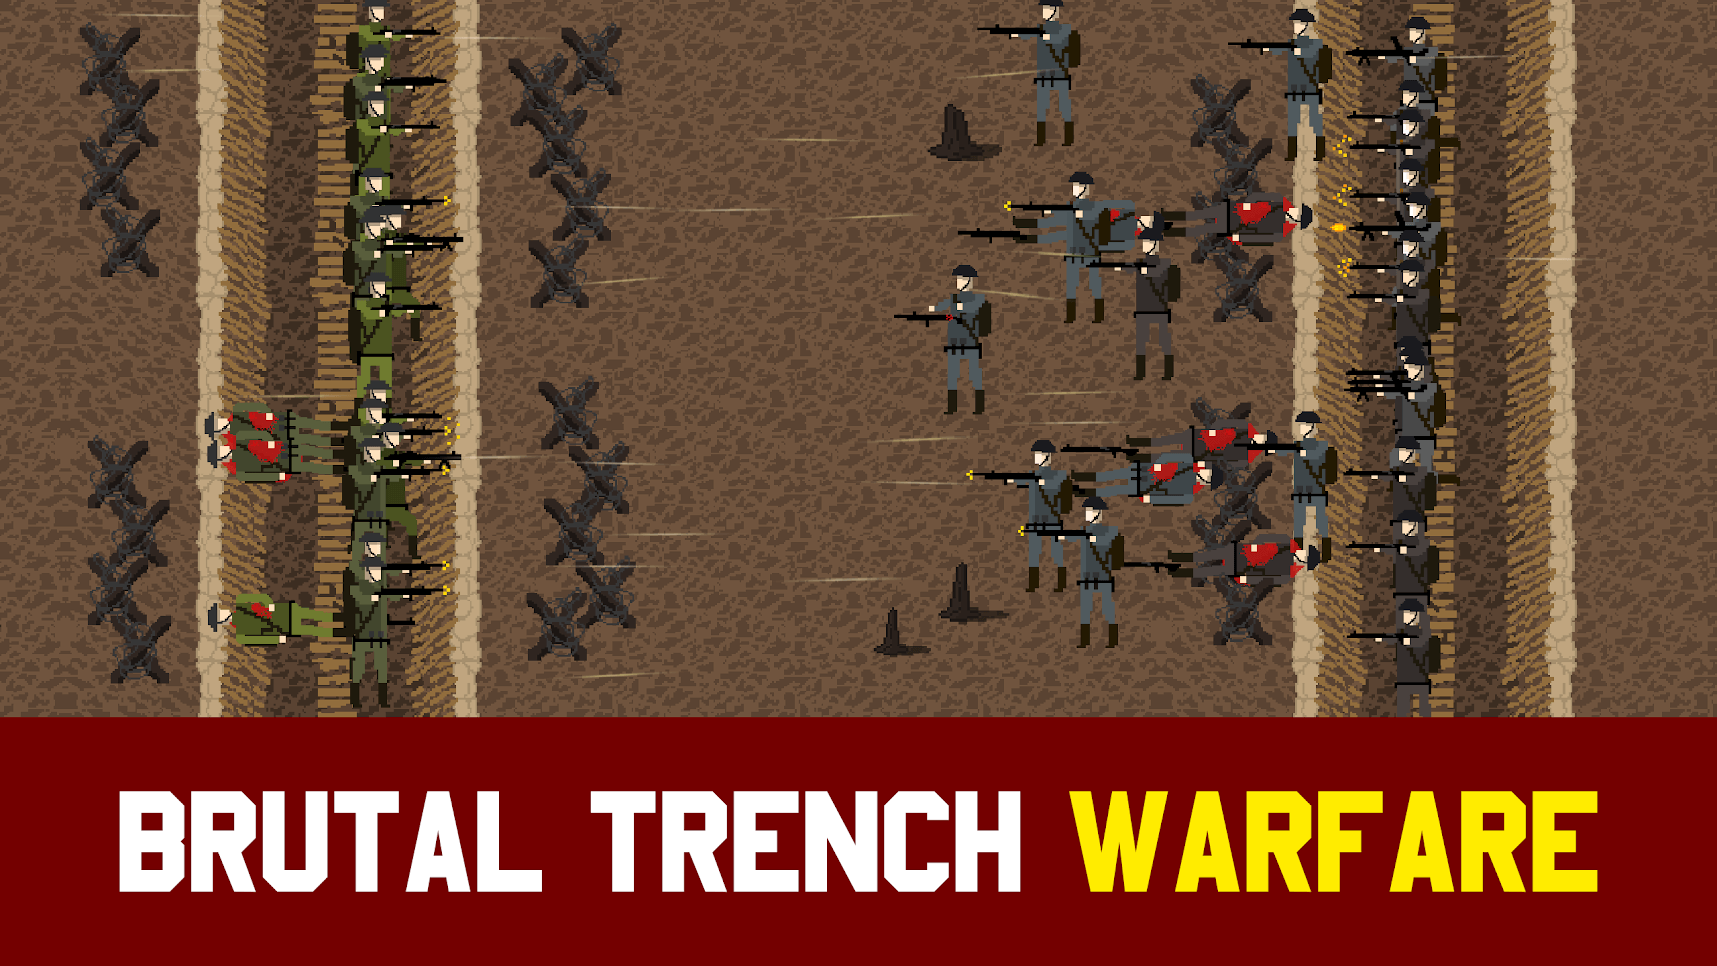 Trench-Warfare-1917-WW1-Strategy-Game-6.png